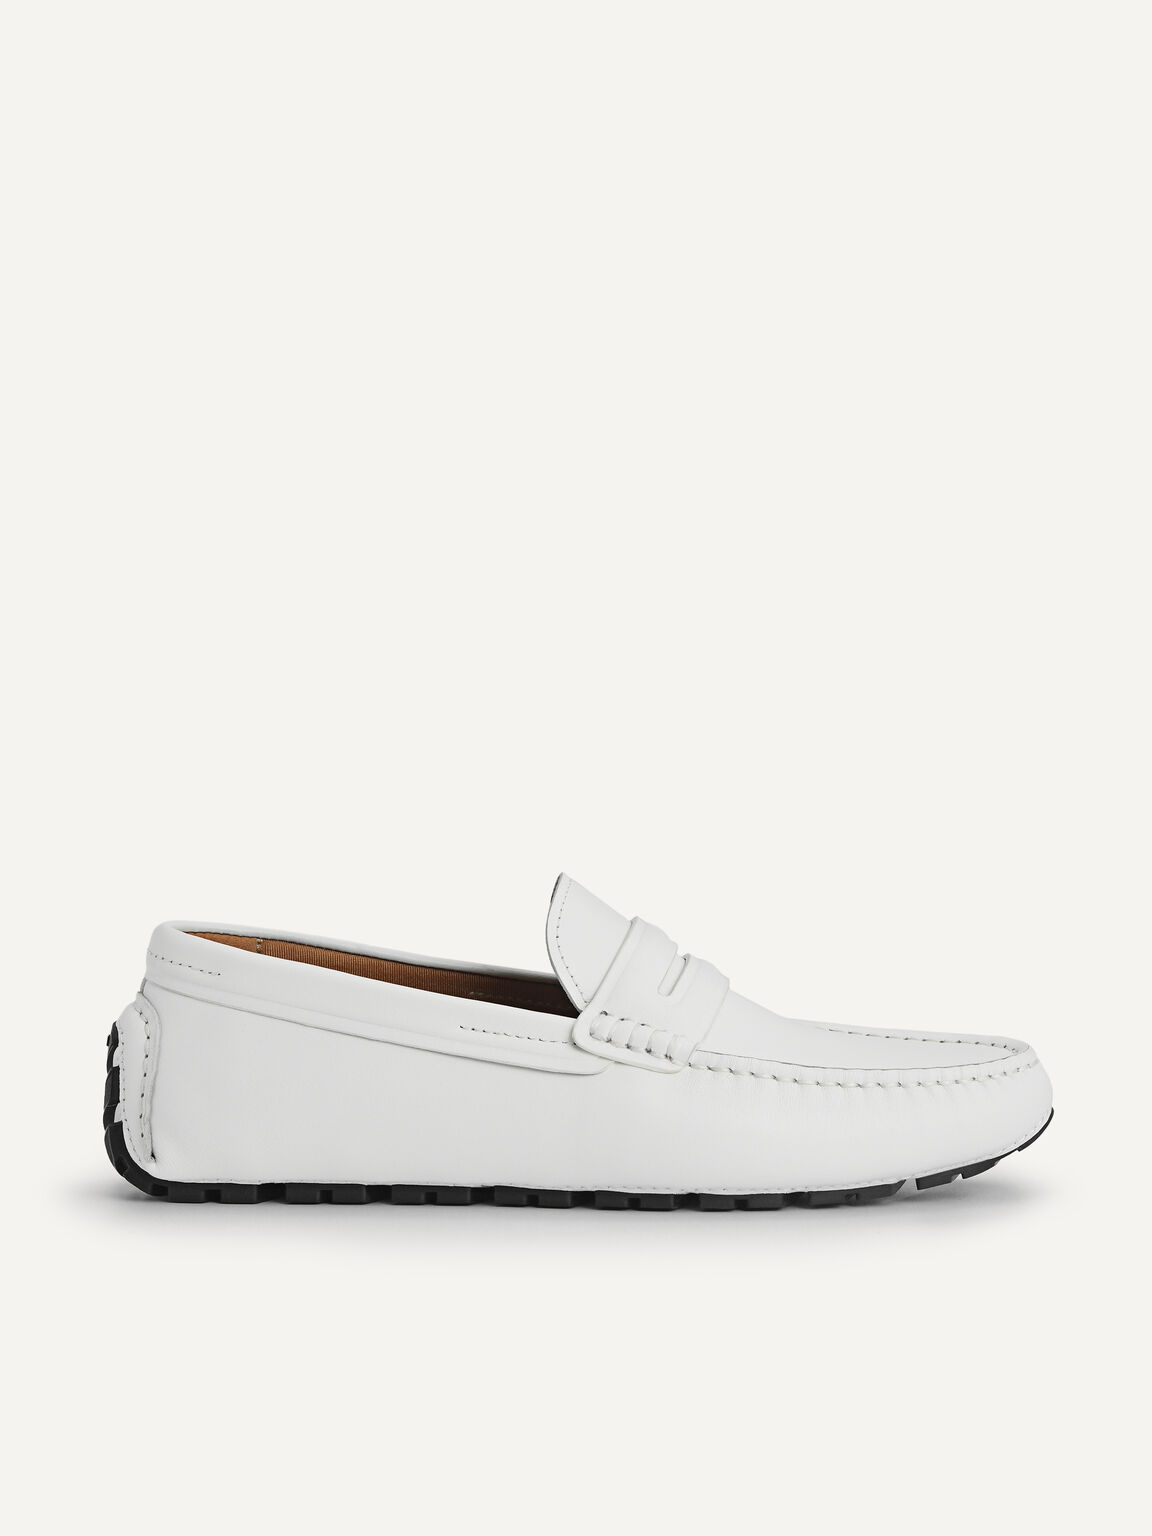 Leather Moccasins, White, hi-res